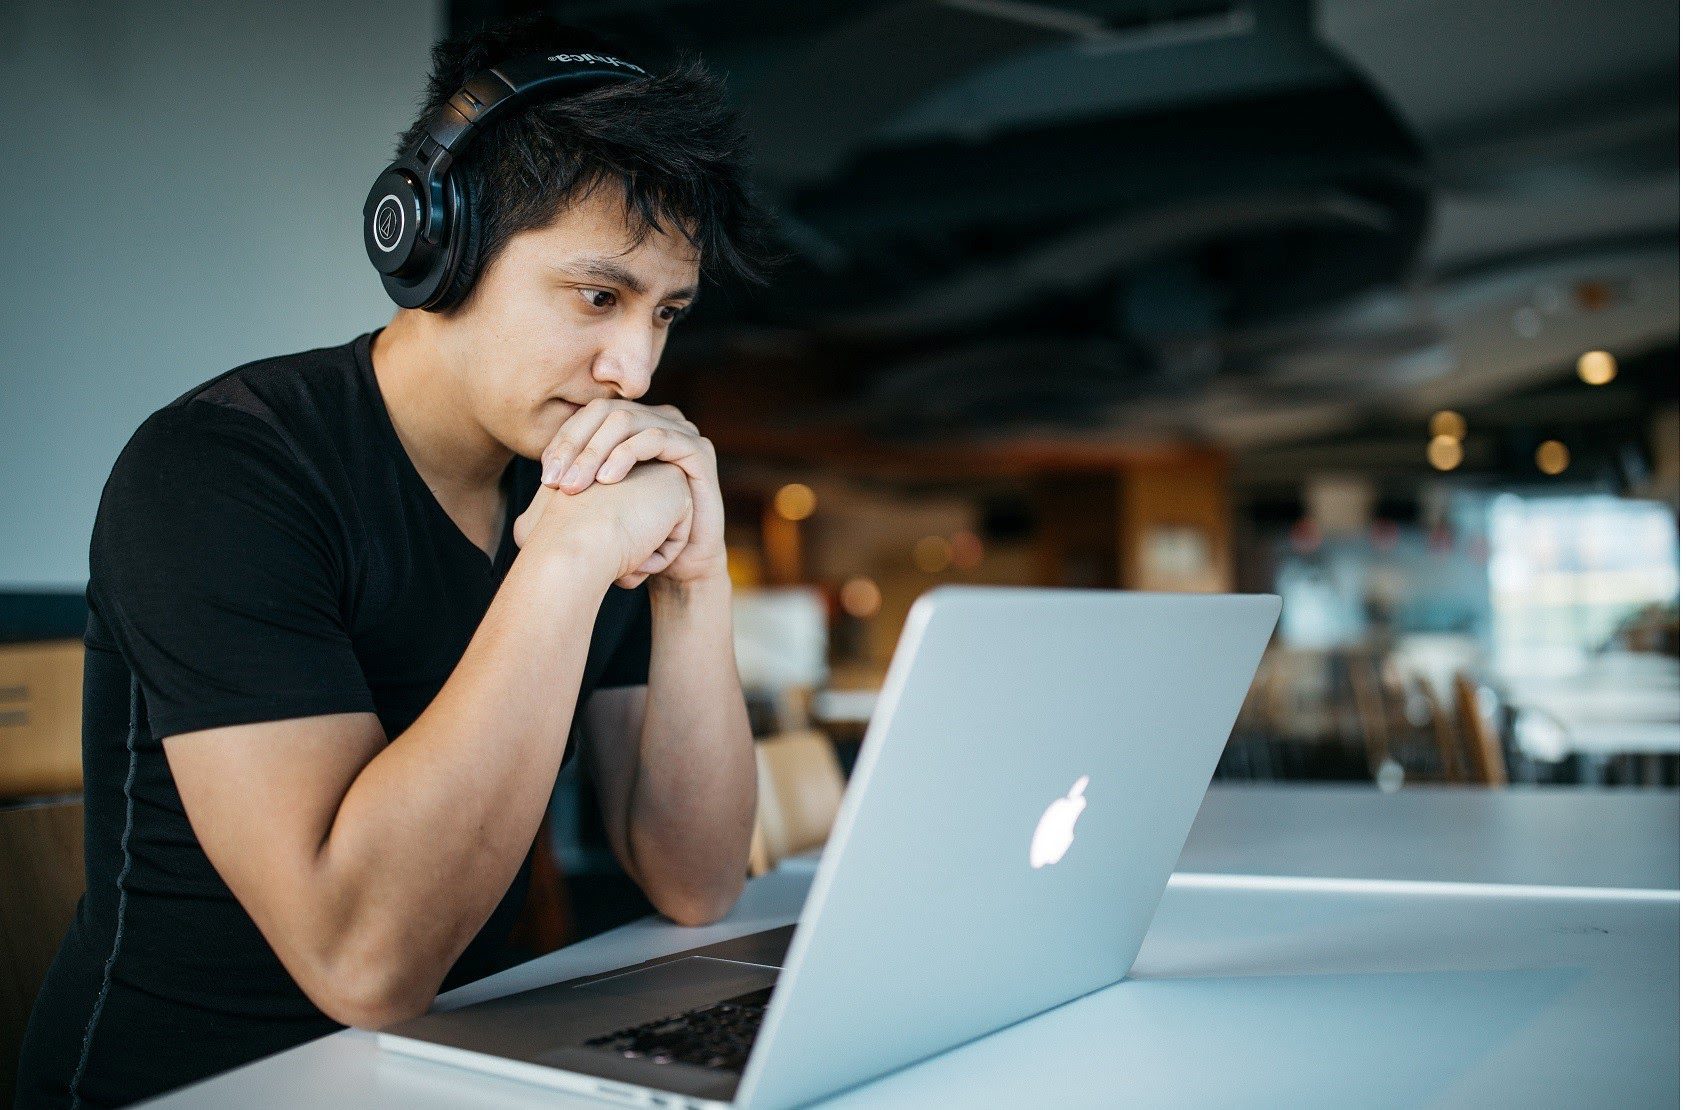  Man wearing headphones looking at a MacBook How To Find An Apprenticeship 